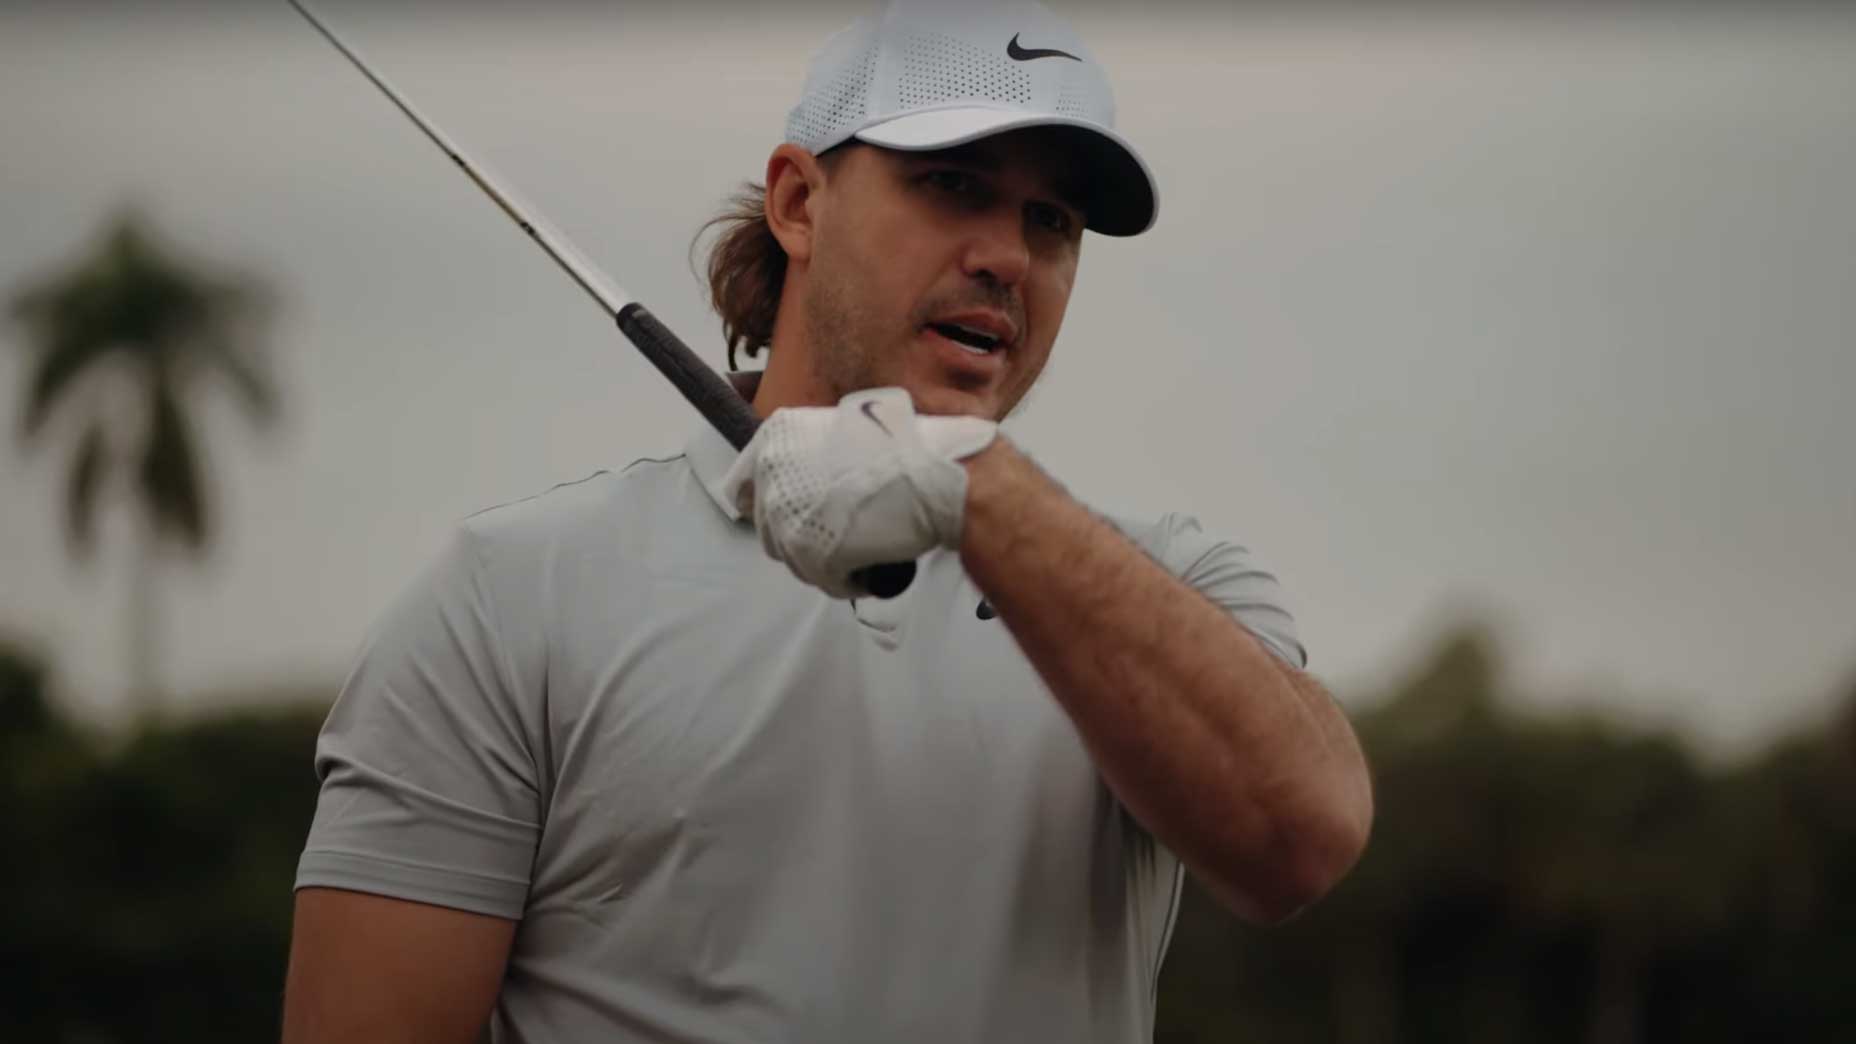 Brooks Koepka taught me 10 lessons in 32 minutes. Here they are